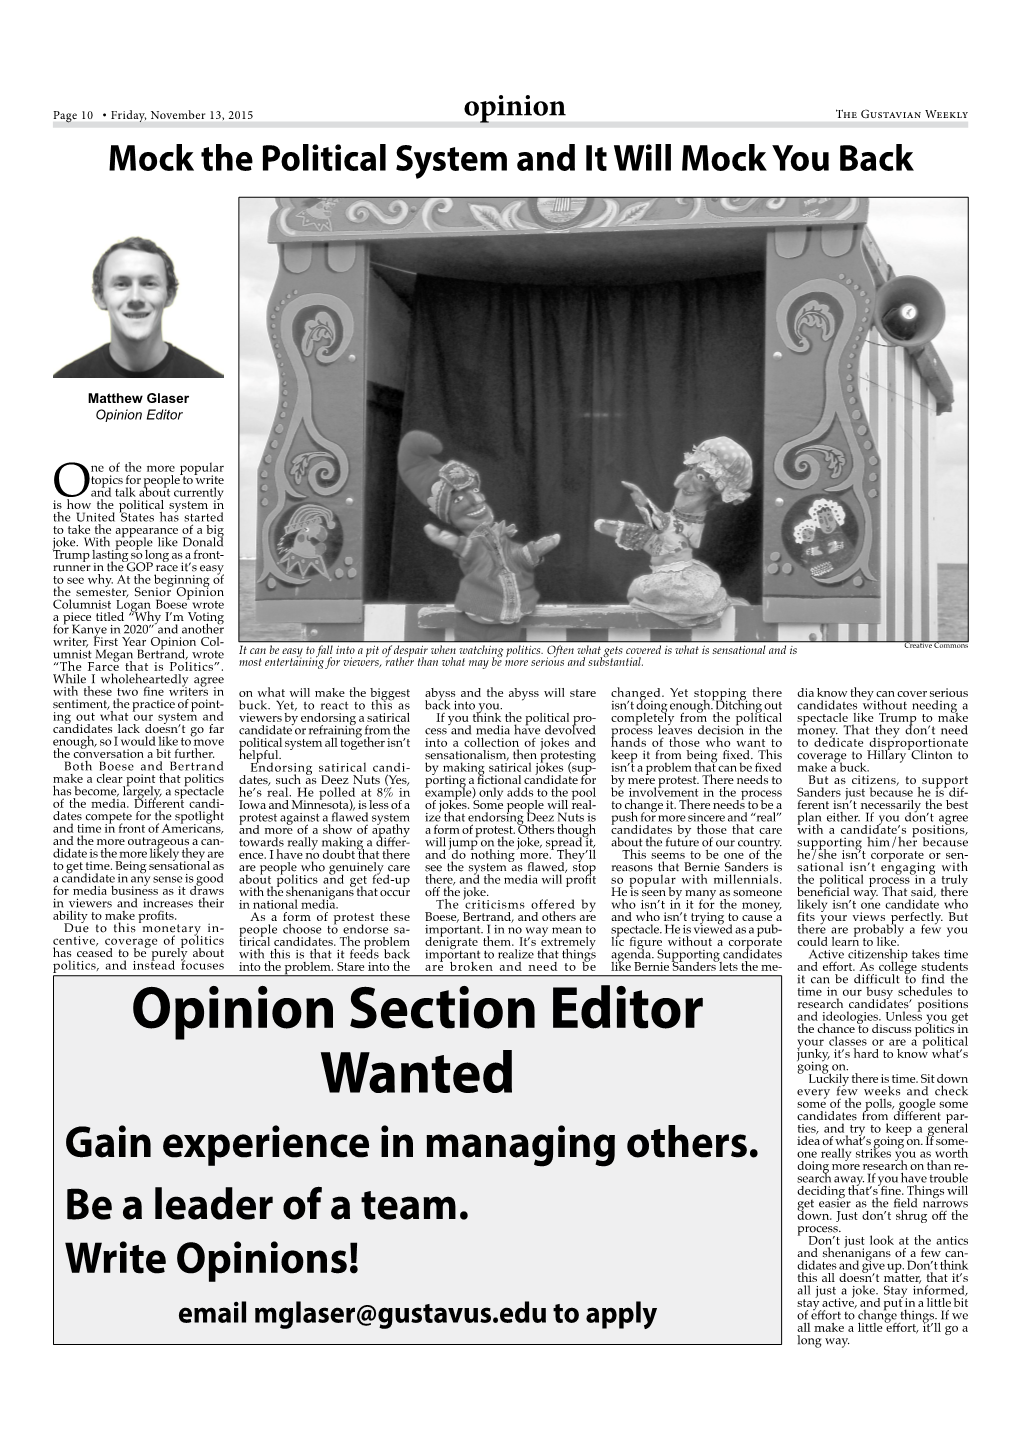 Opinion Section Editor Wanted